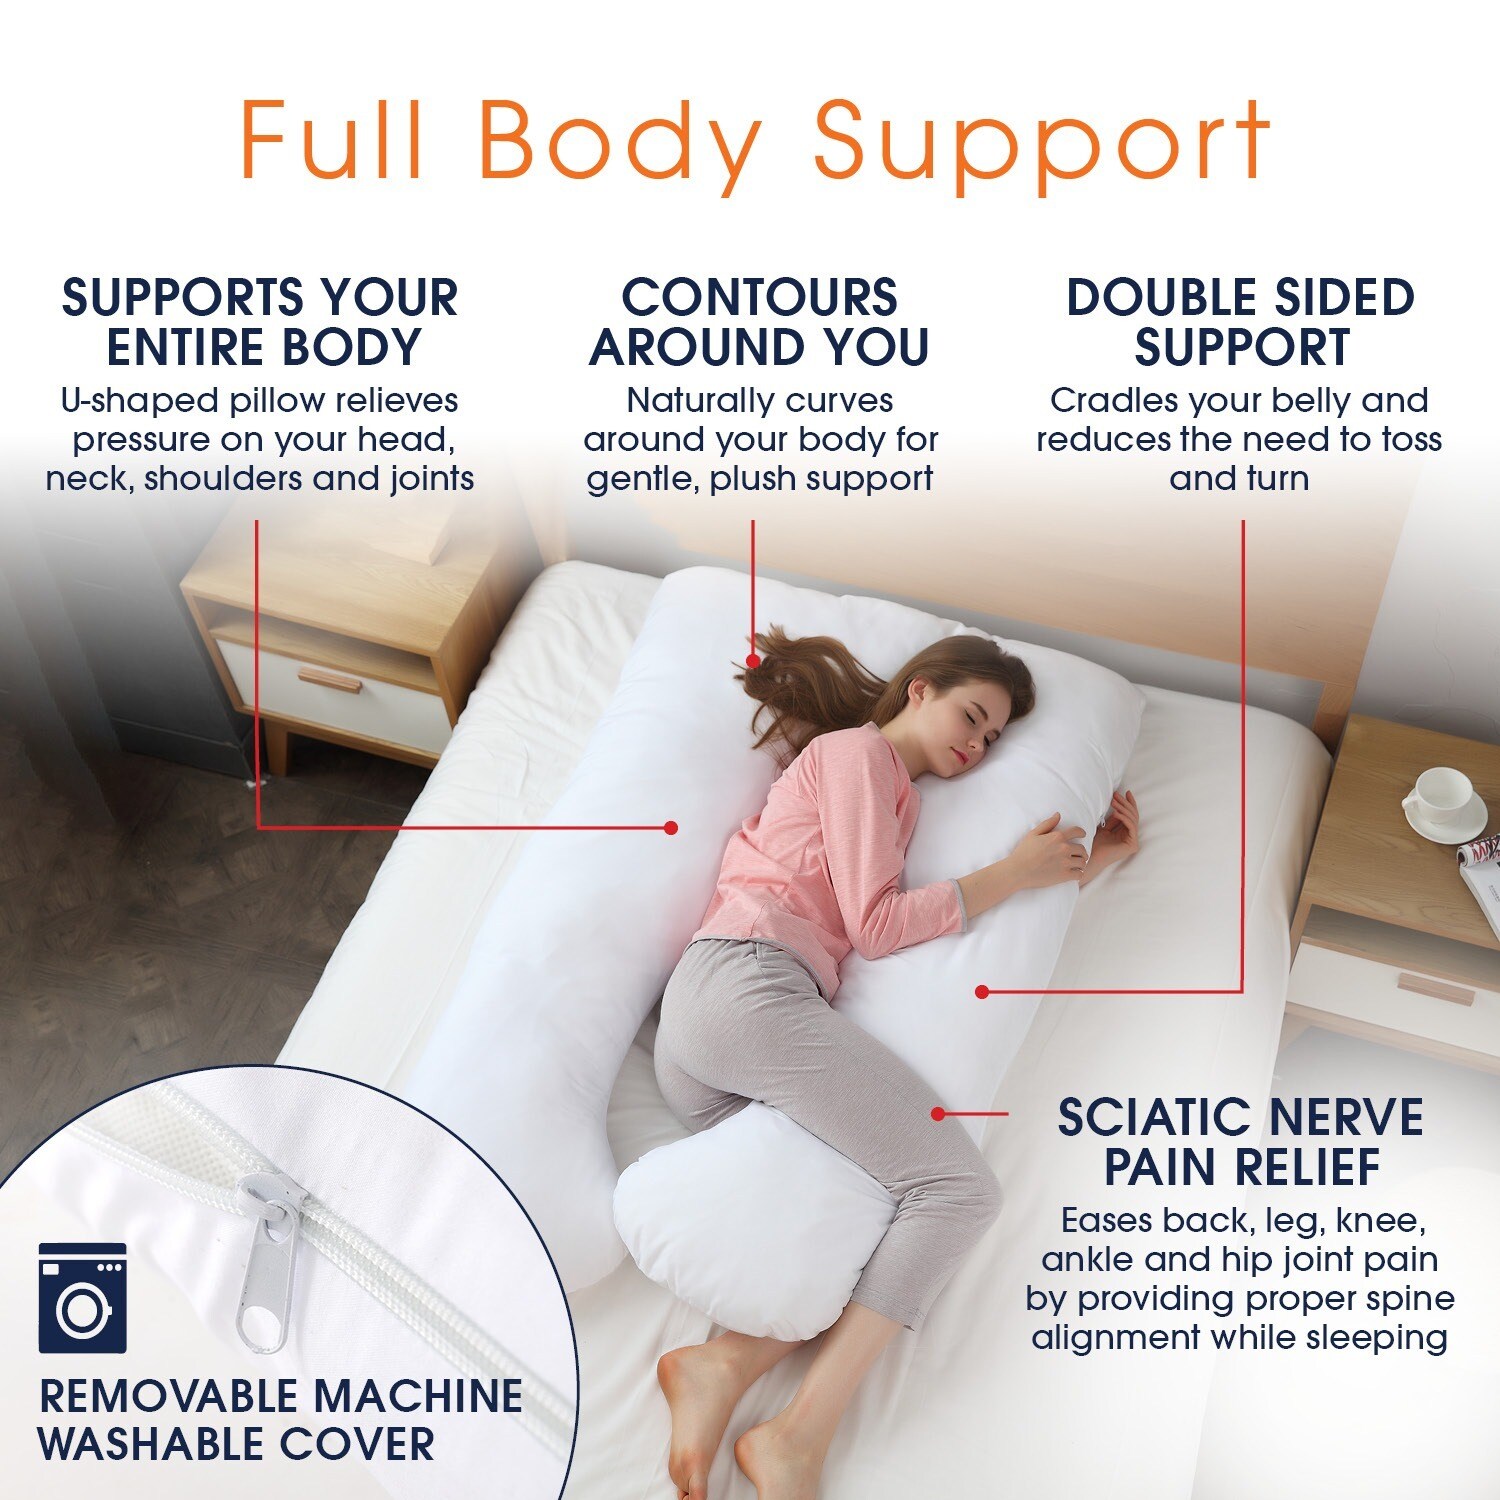 Body Pillows - Full Body Support & Spinal Alignment